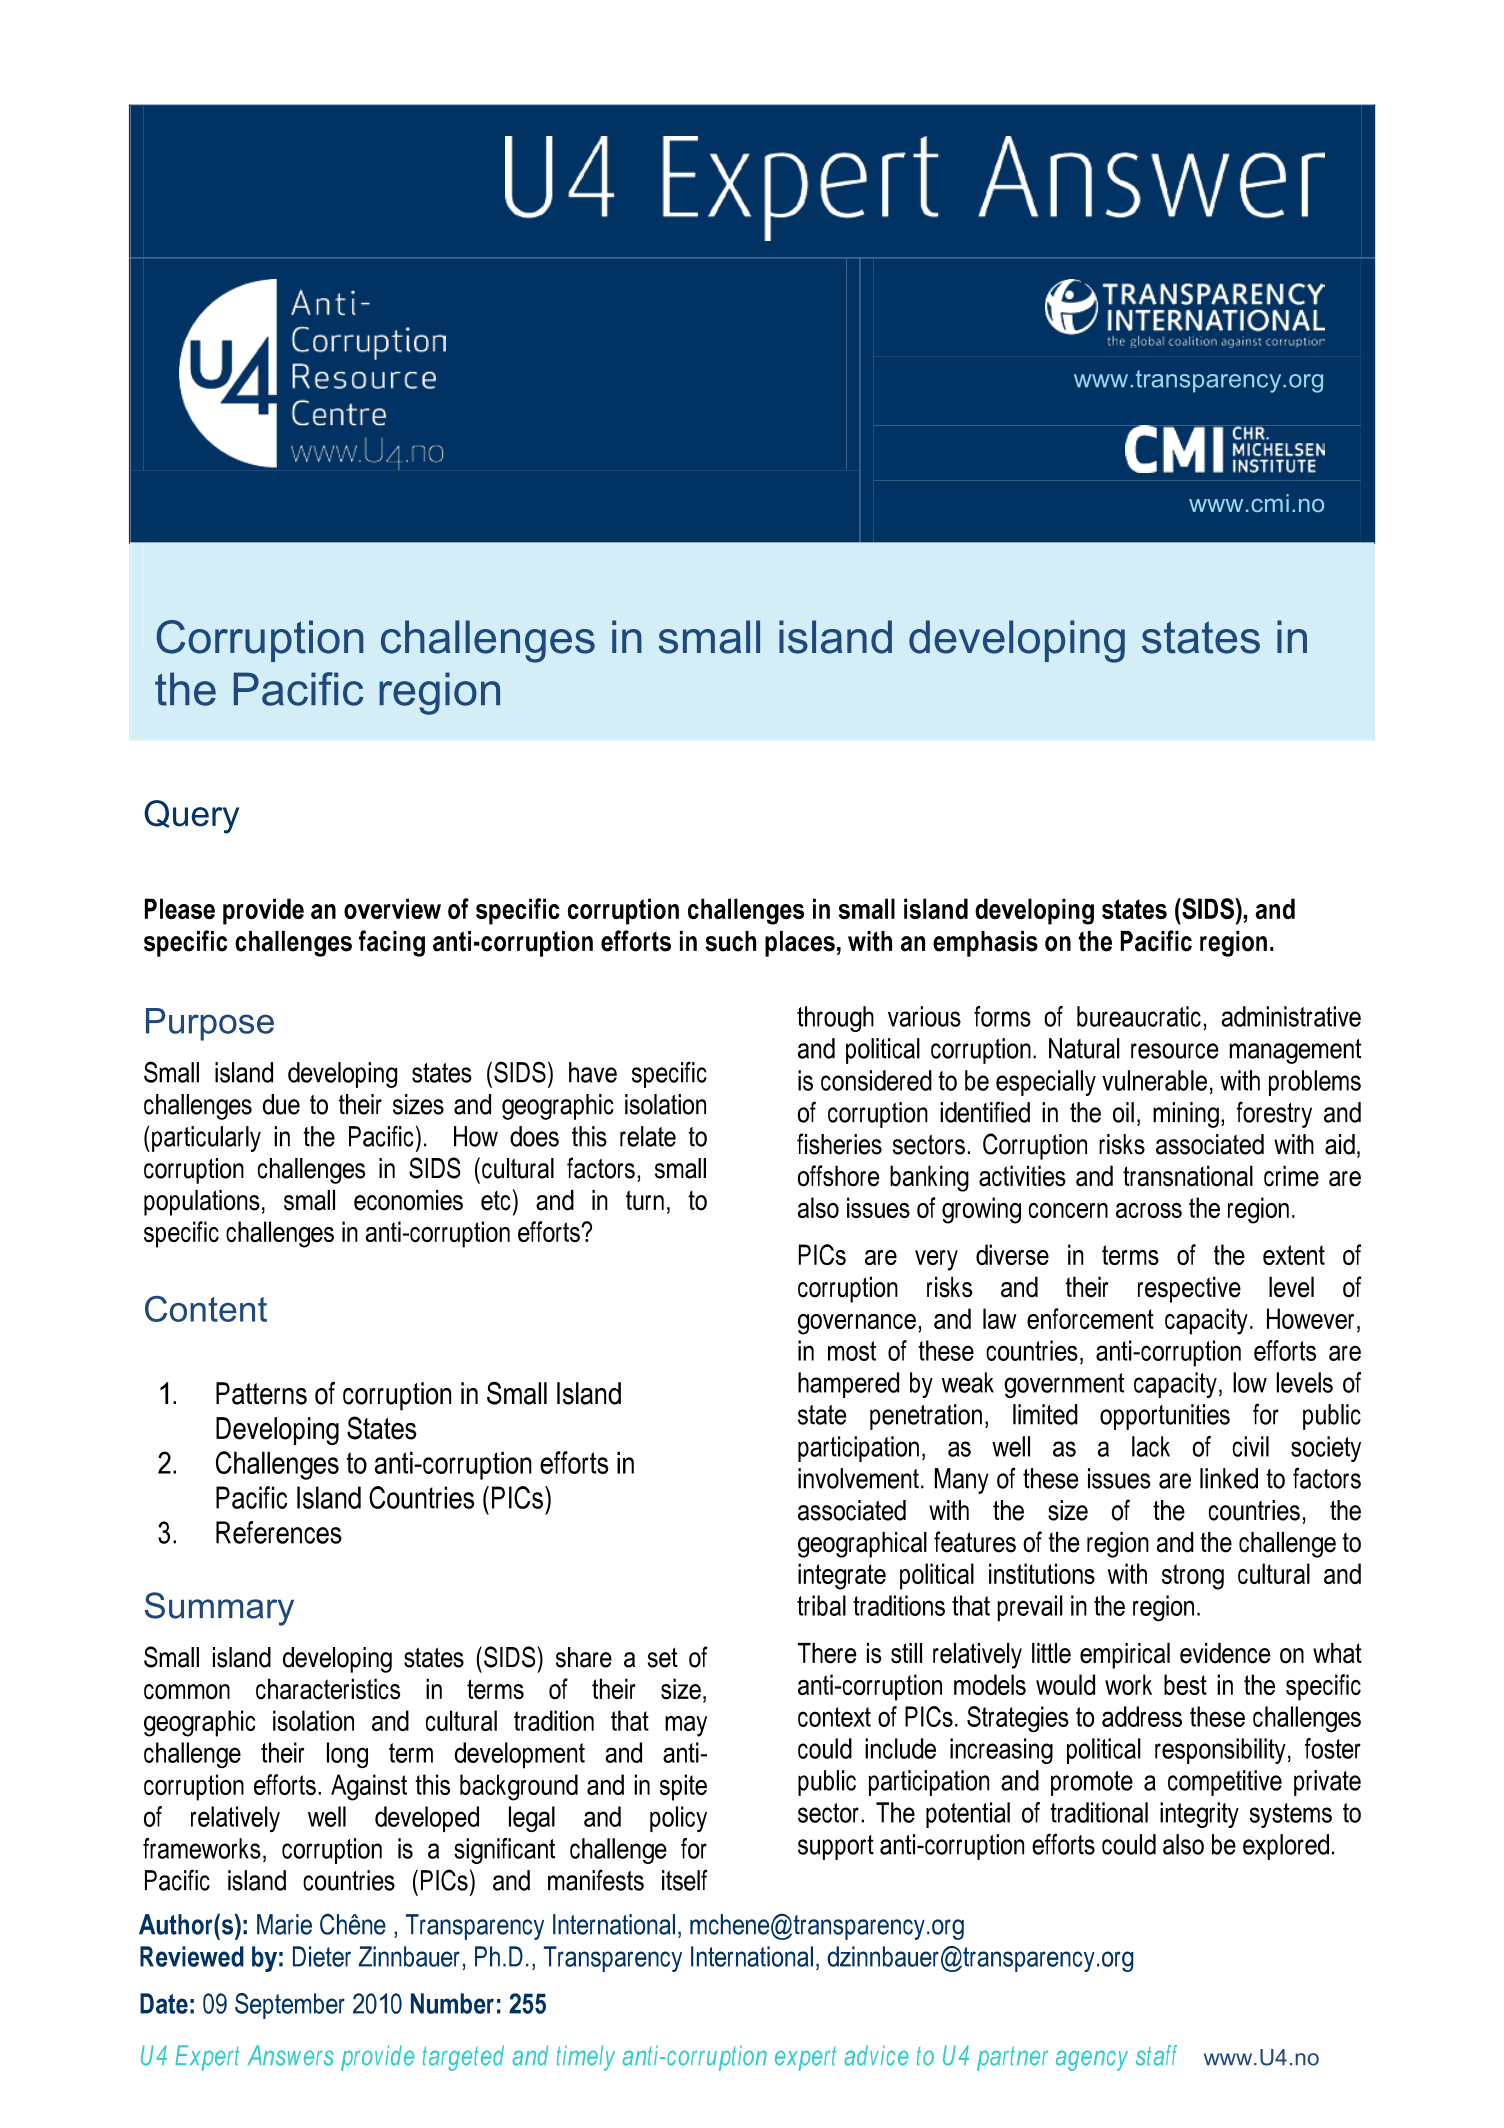 Corruption challenges in small island developing states in the Pacific region